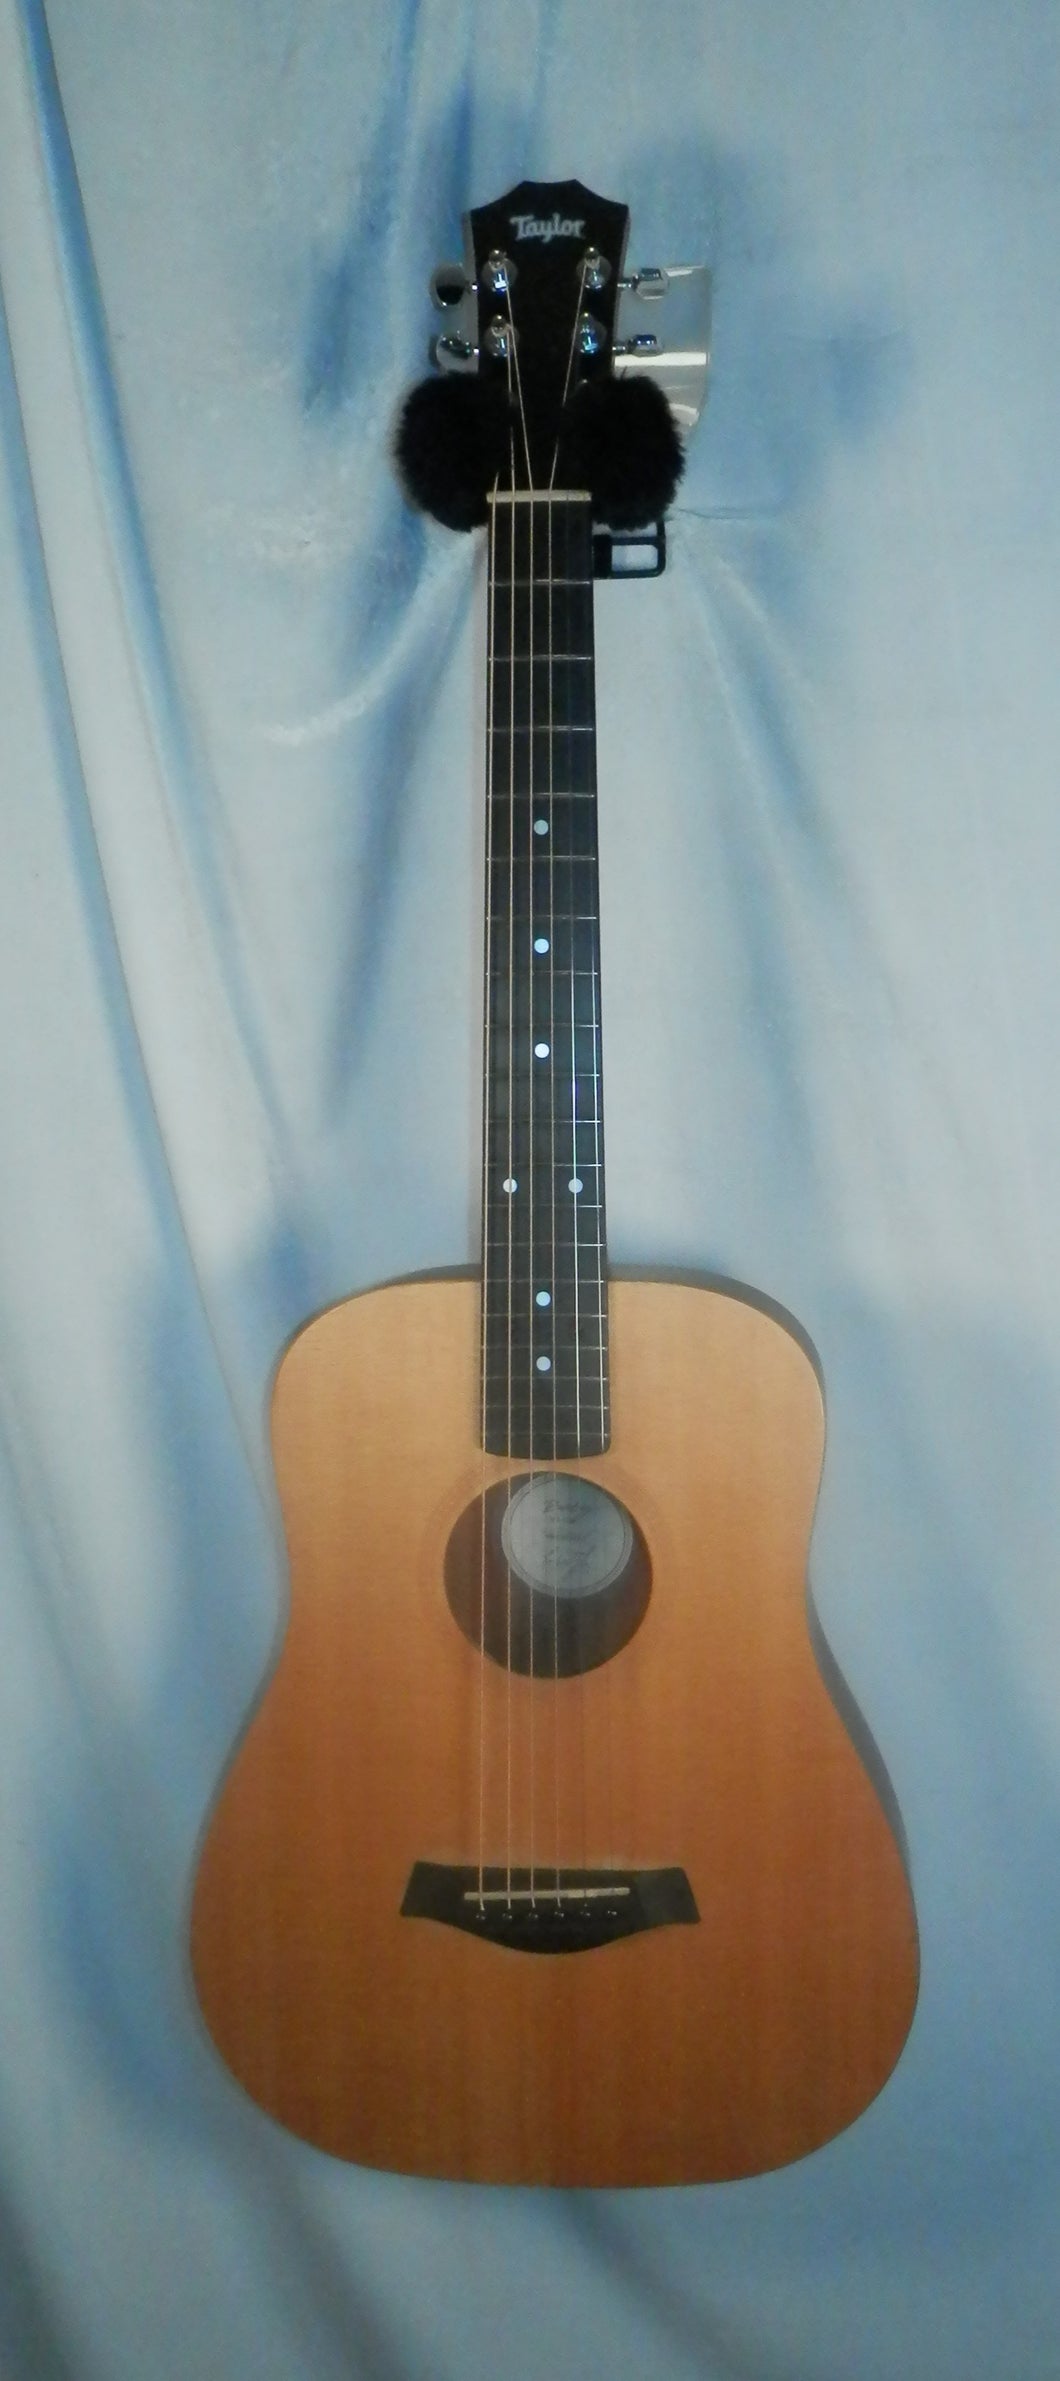 Taylor Baby Taylor 301 GB acoustic guitar with gig bag used